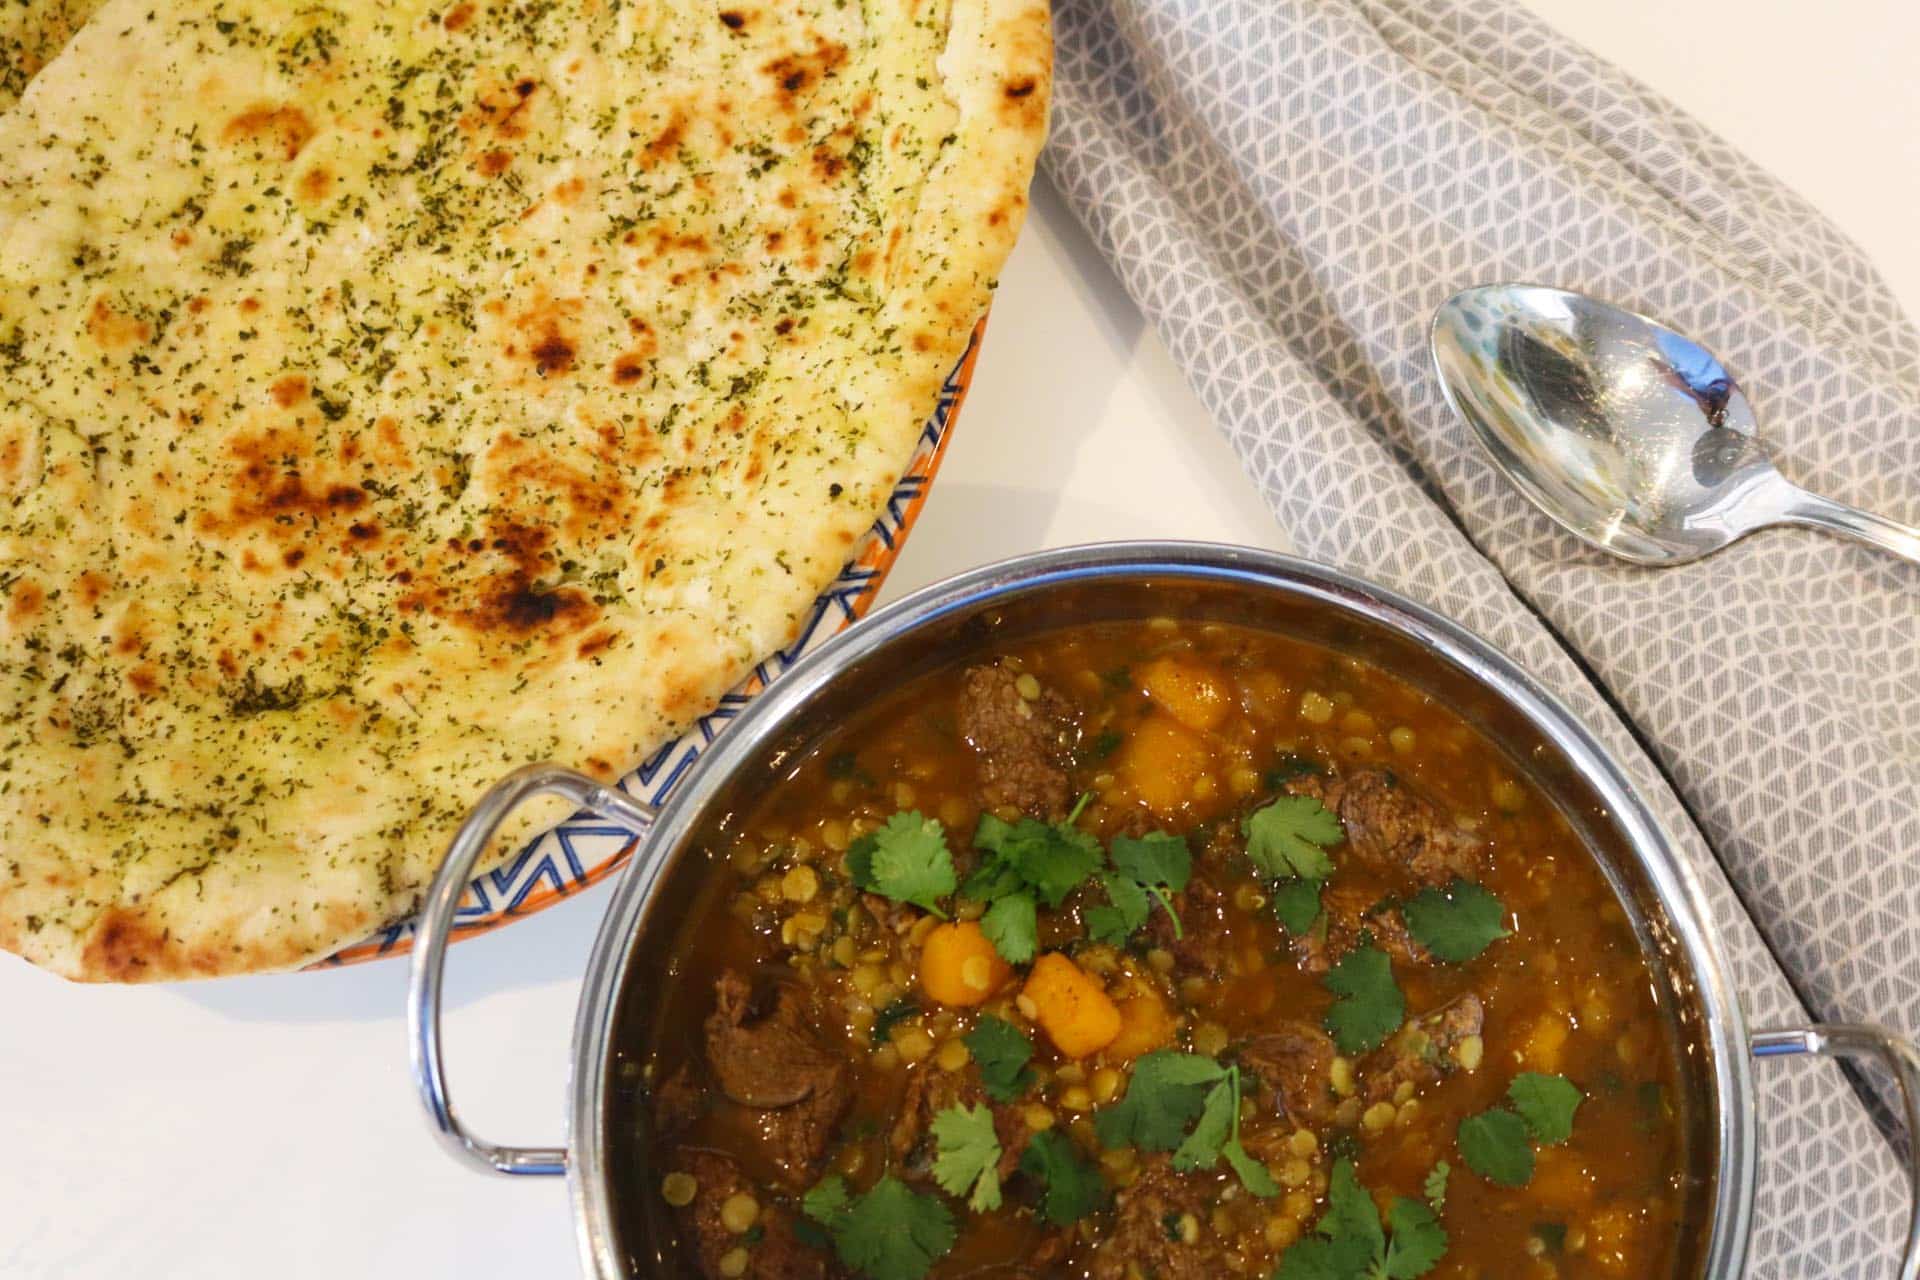 Dhansak in a balti dish with large naan bread on the side